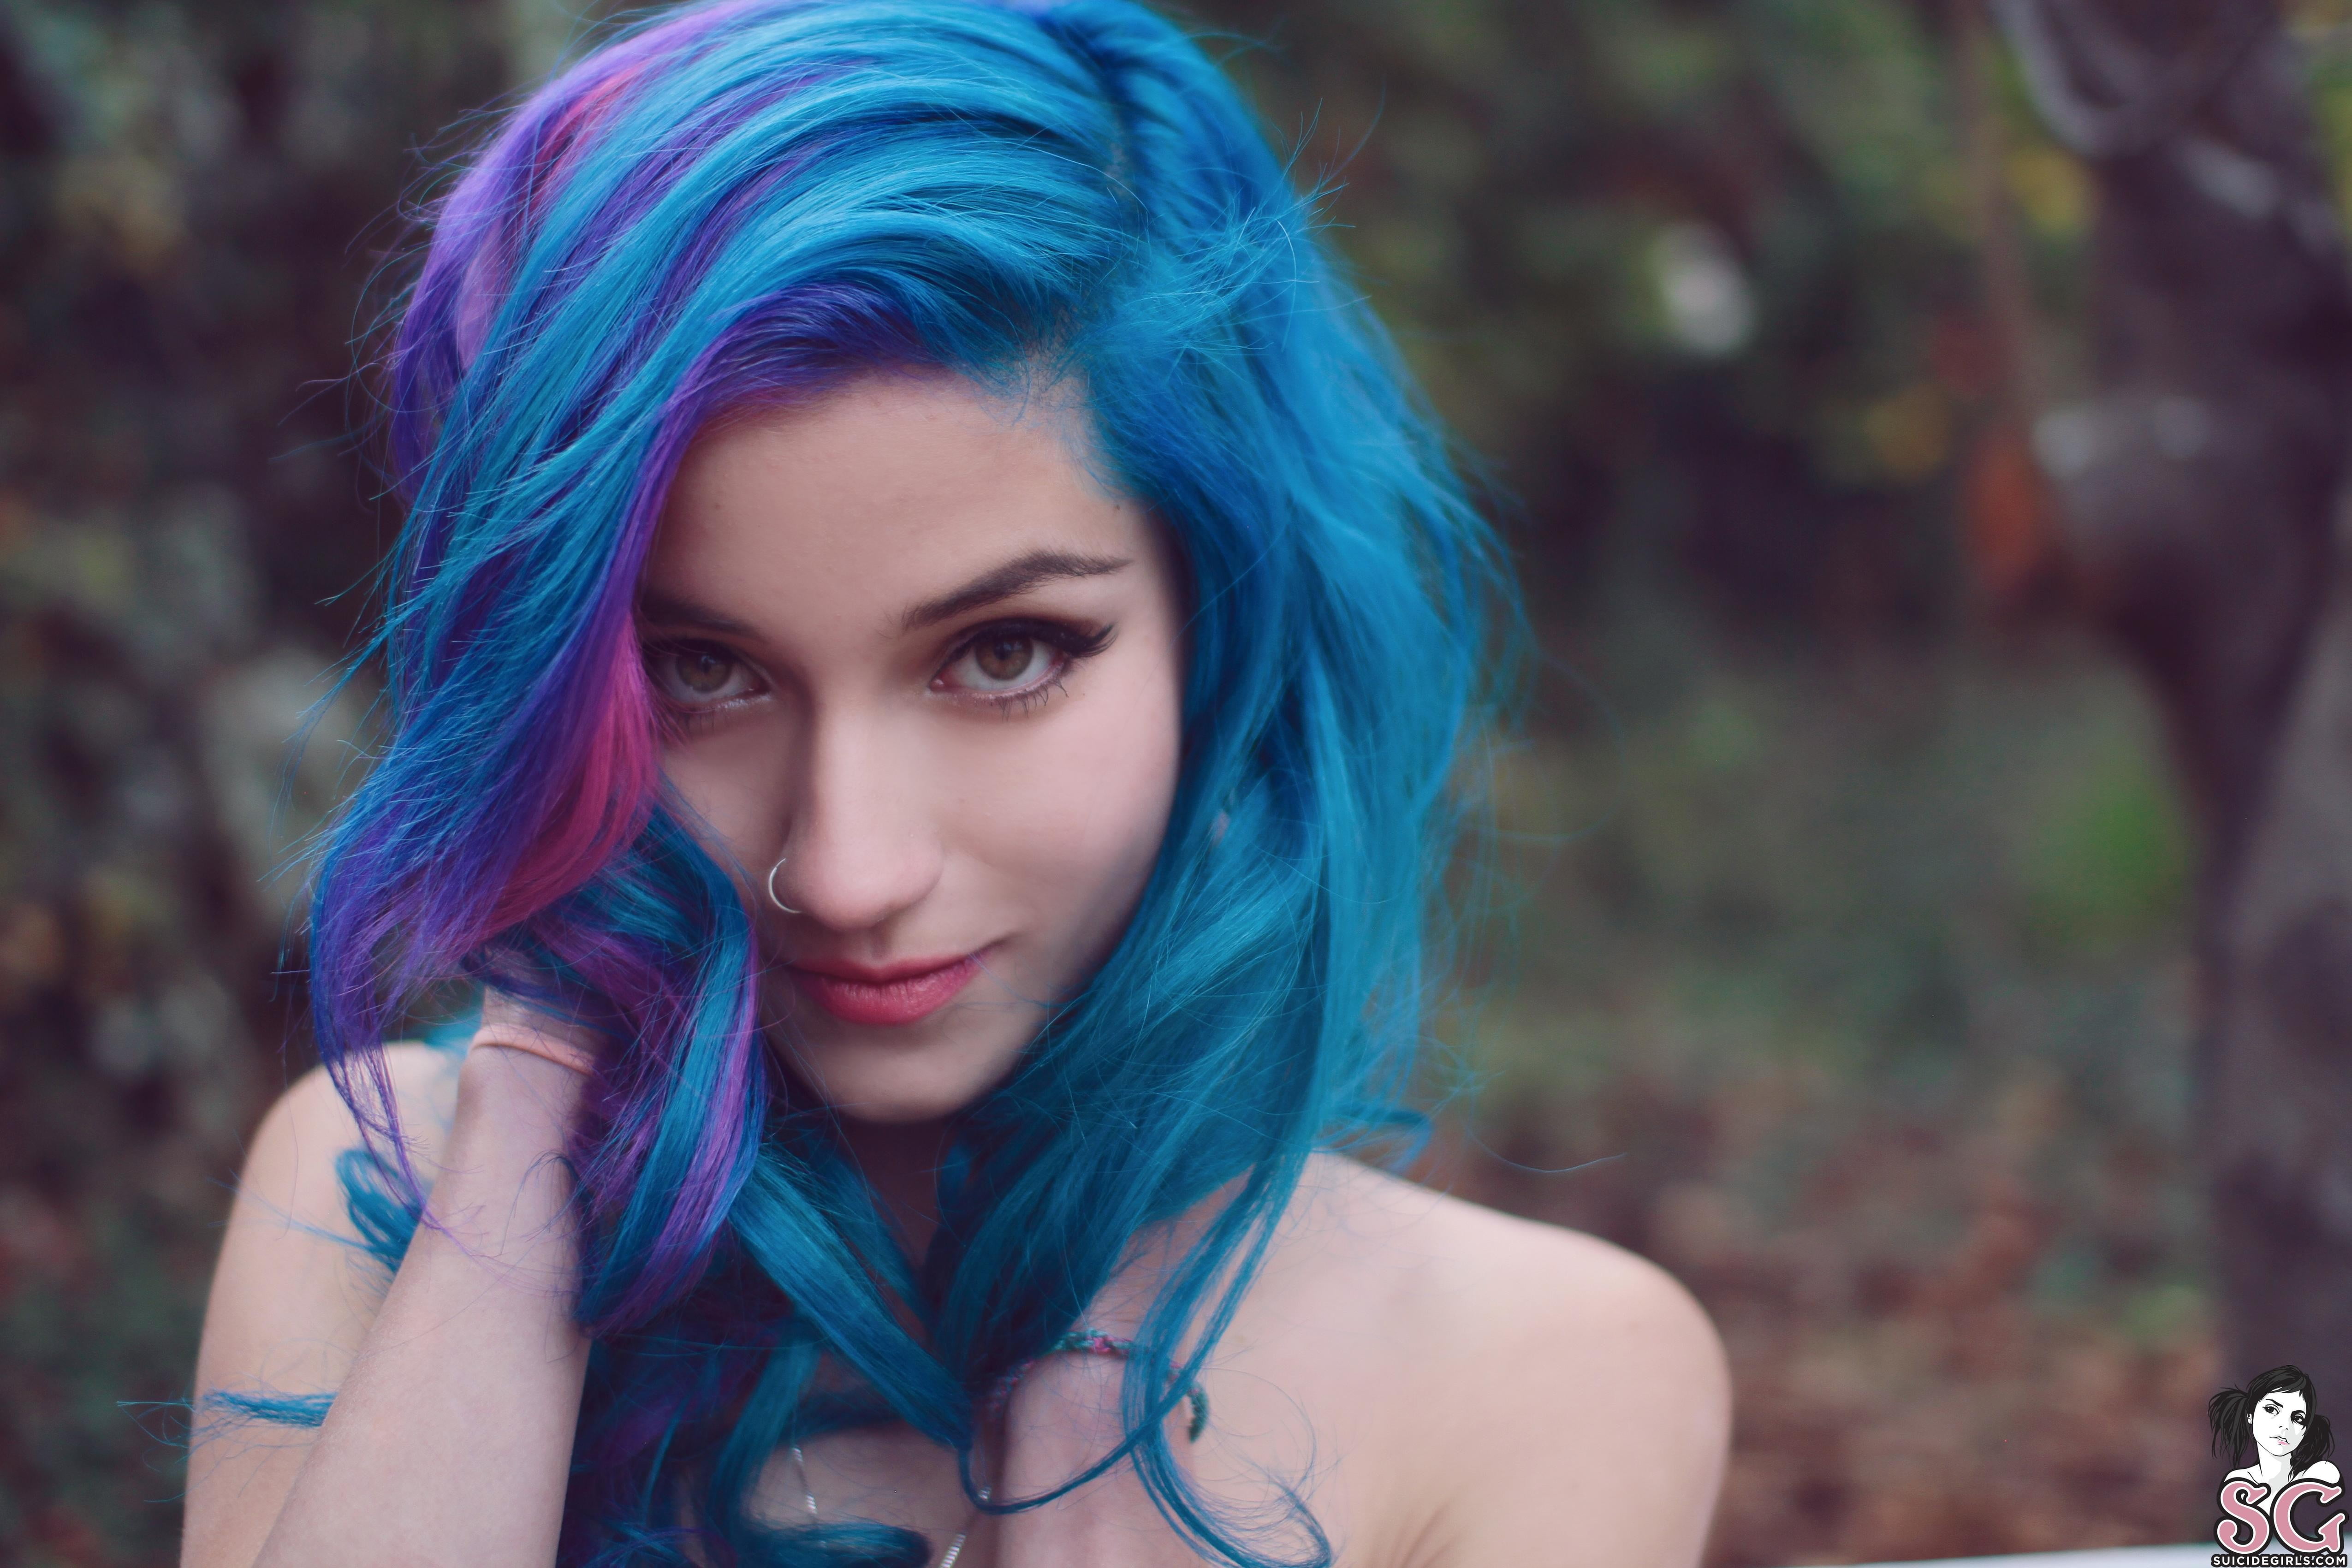 Pink and Blue Hair Ideas - wide 9